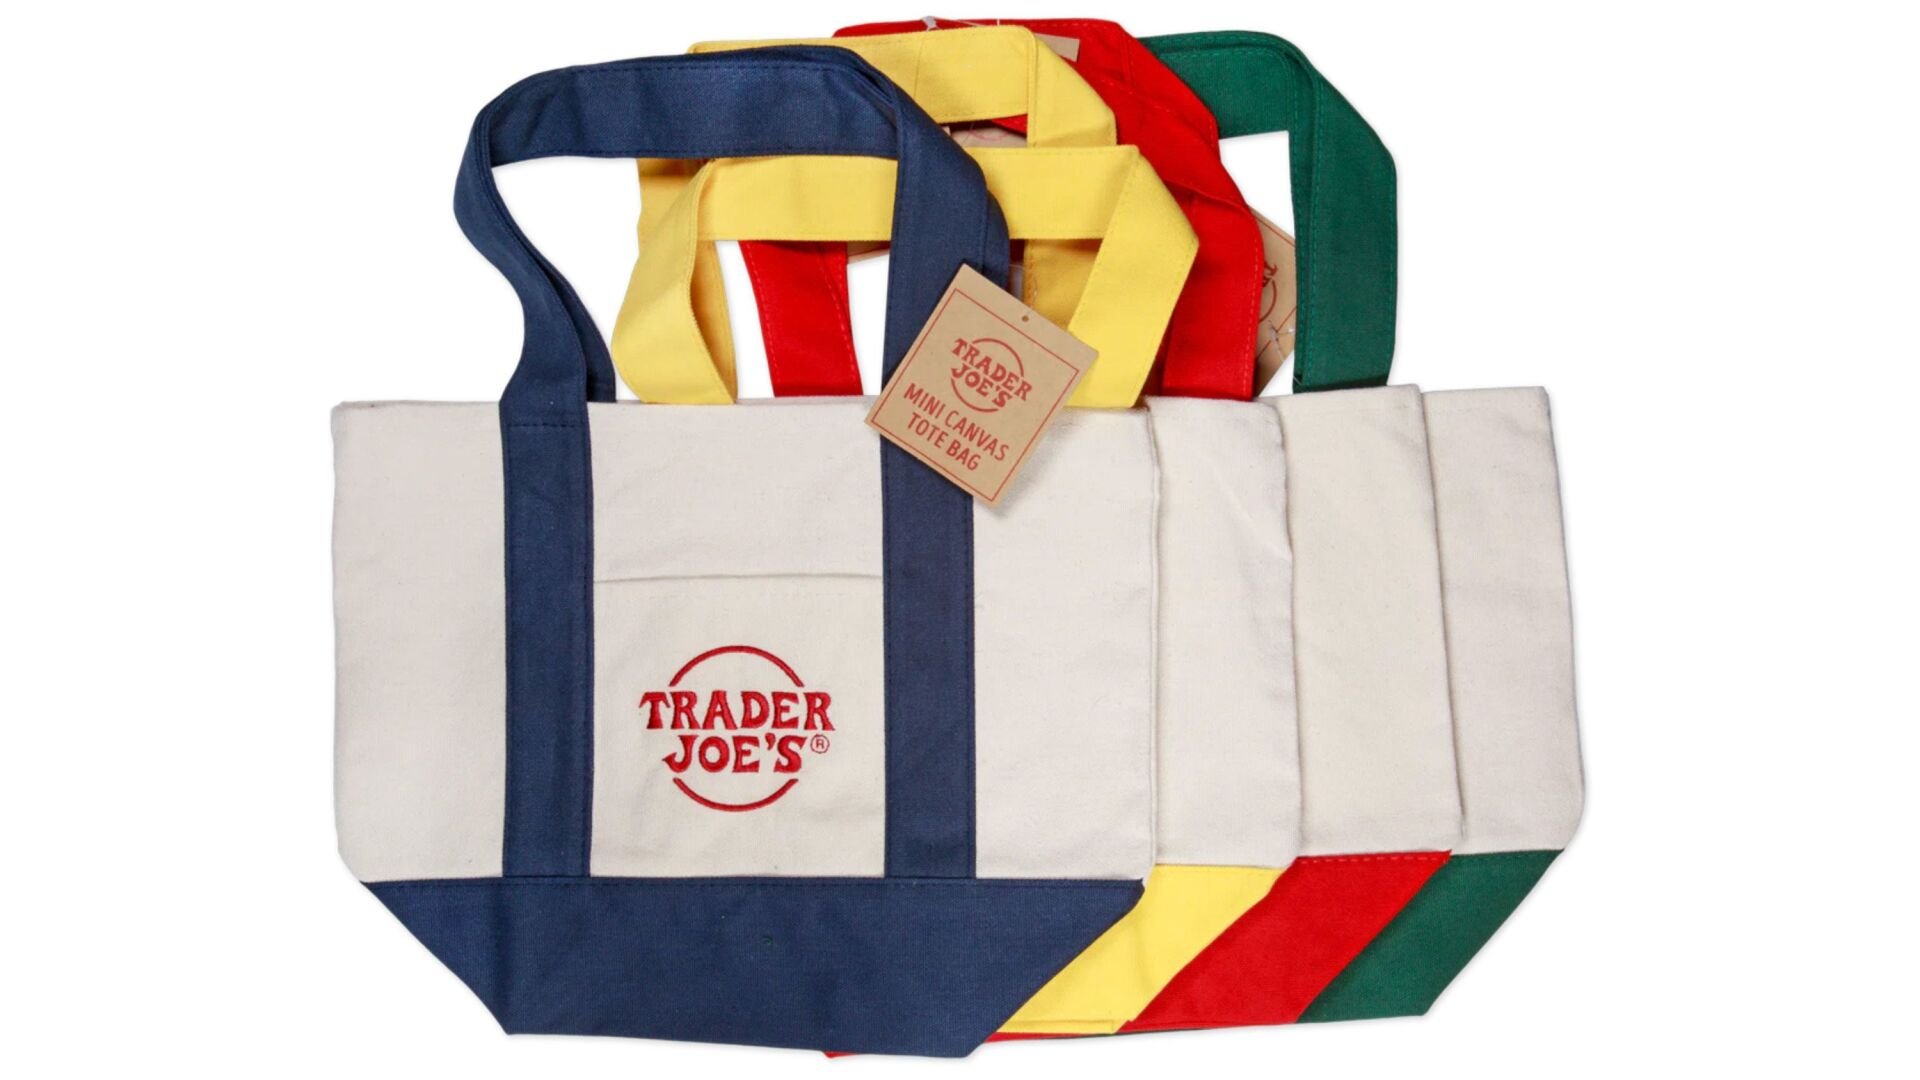 These viral $2.99 Trader Joe's tote bags are being resold for as